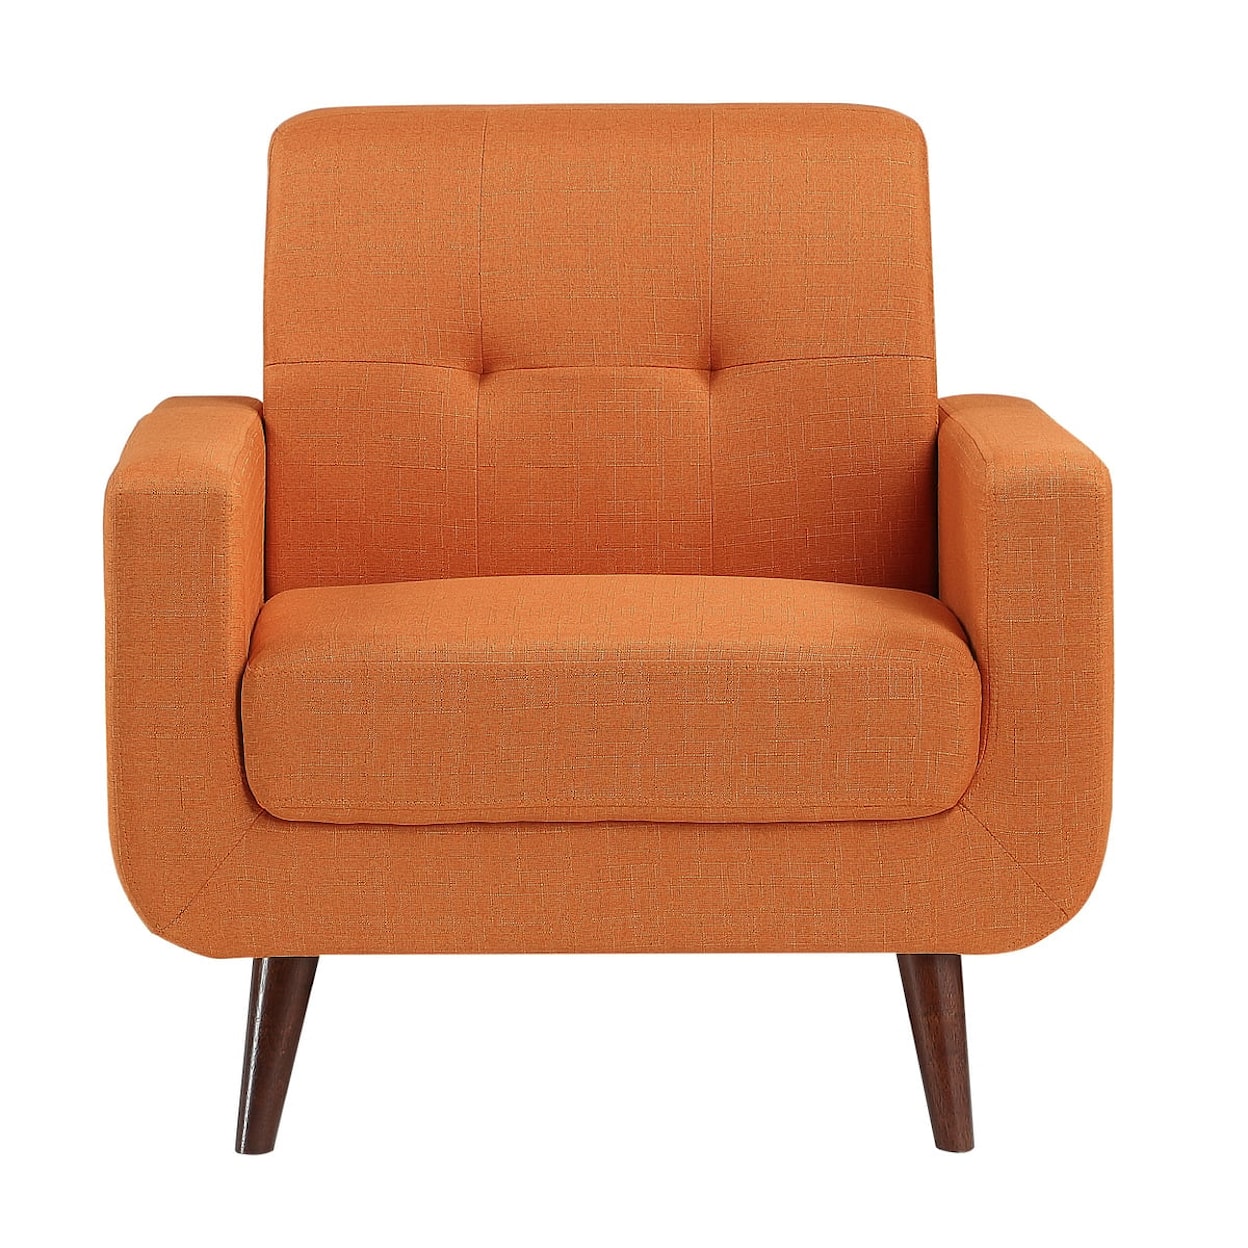 Homelegance Furniture Fitch Chair